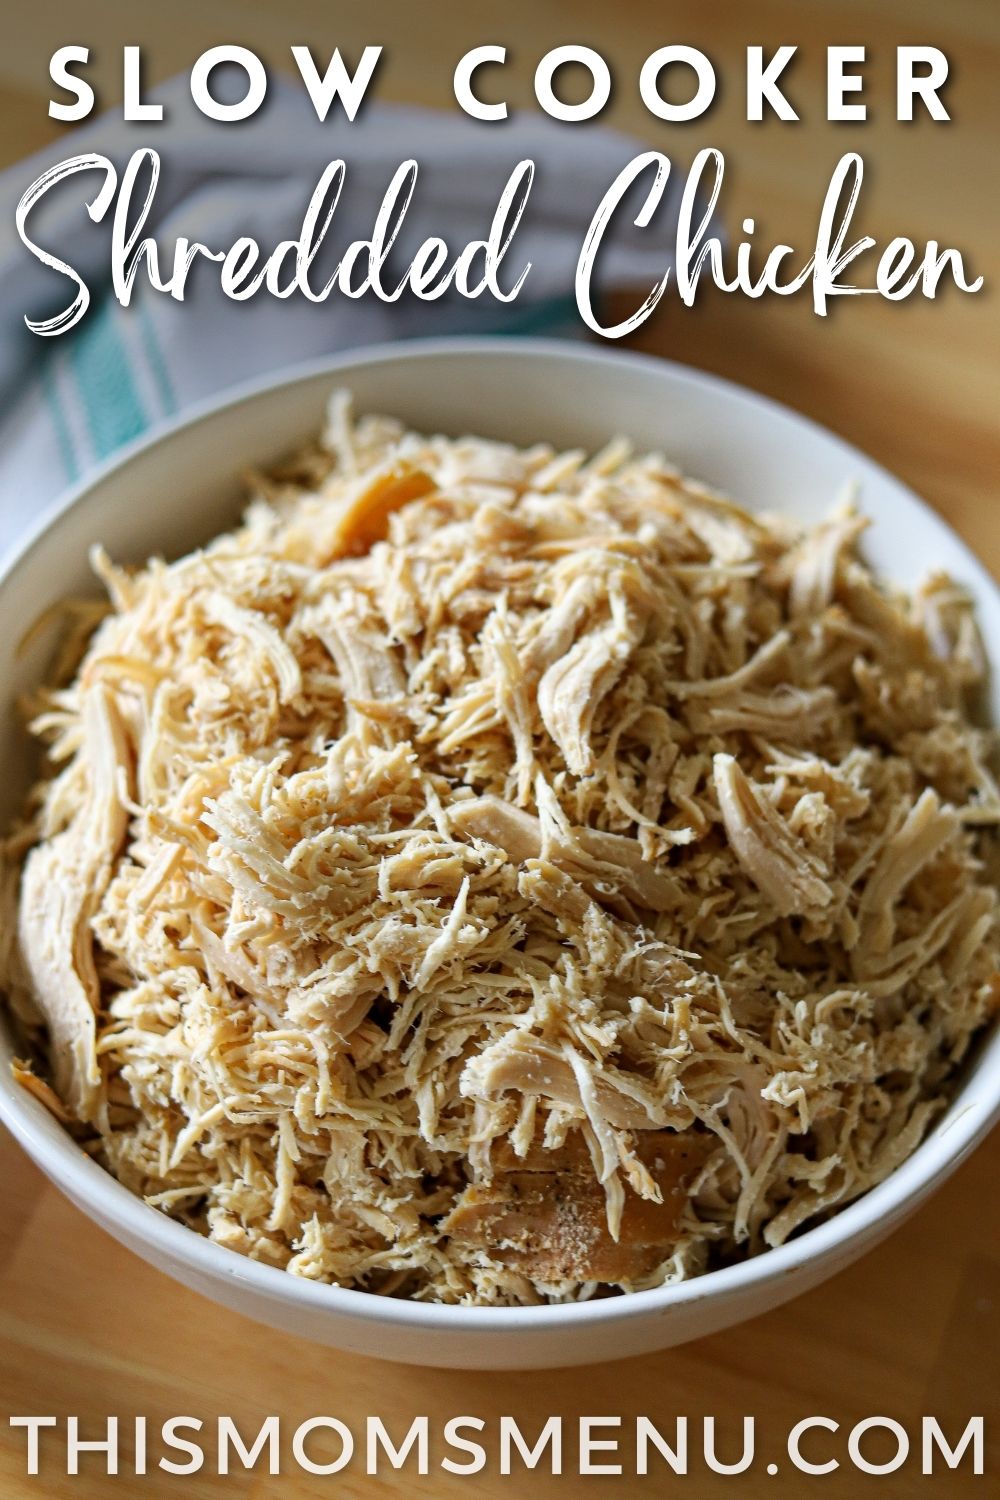 shredded chicken that was cooked in a crock pot.